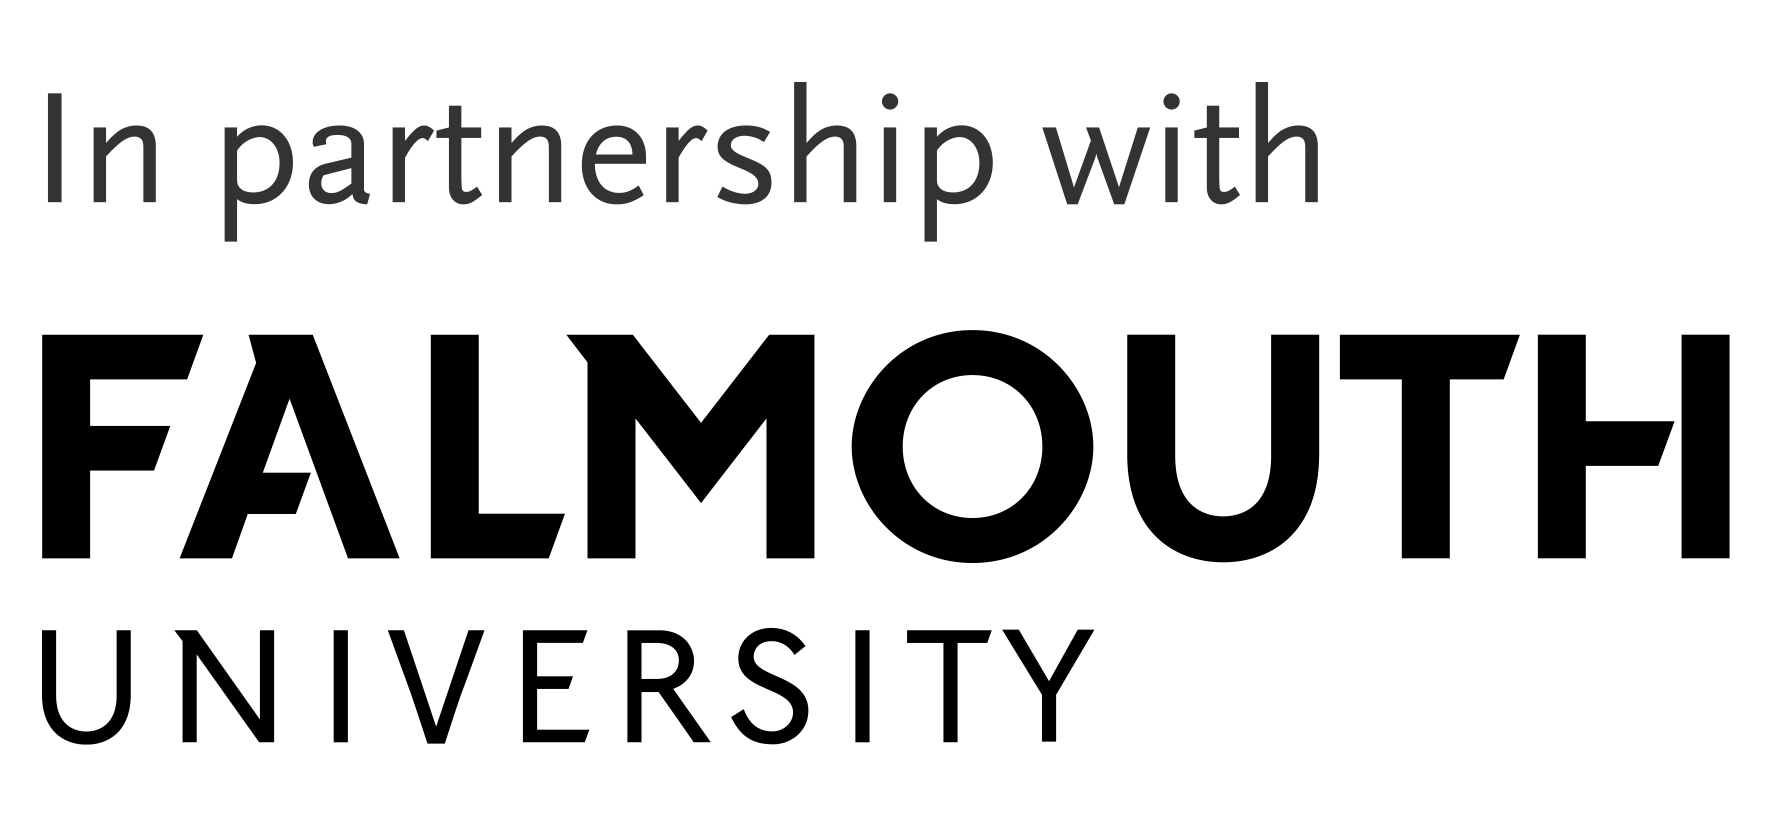 In partnership with Falmouth University logo